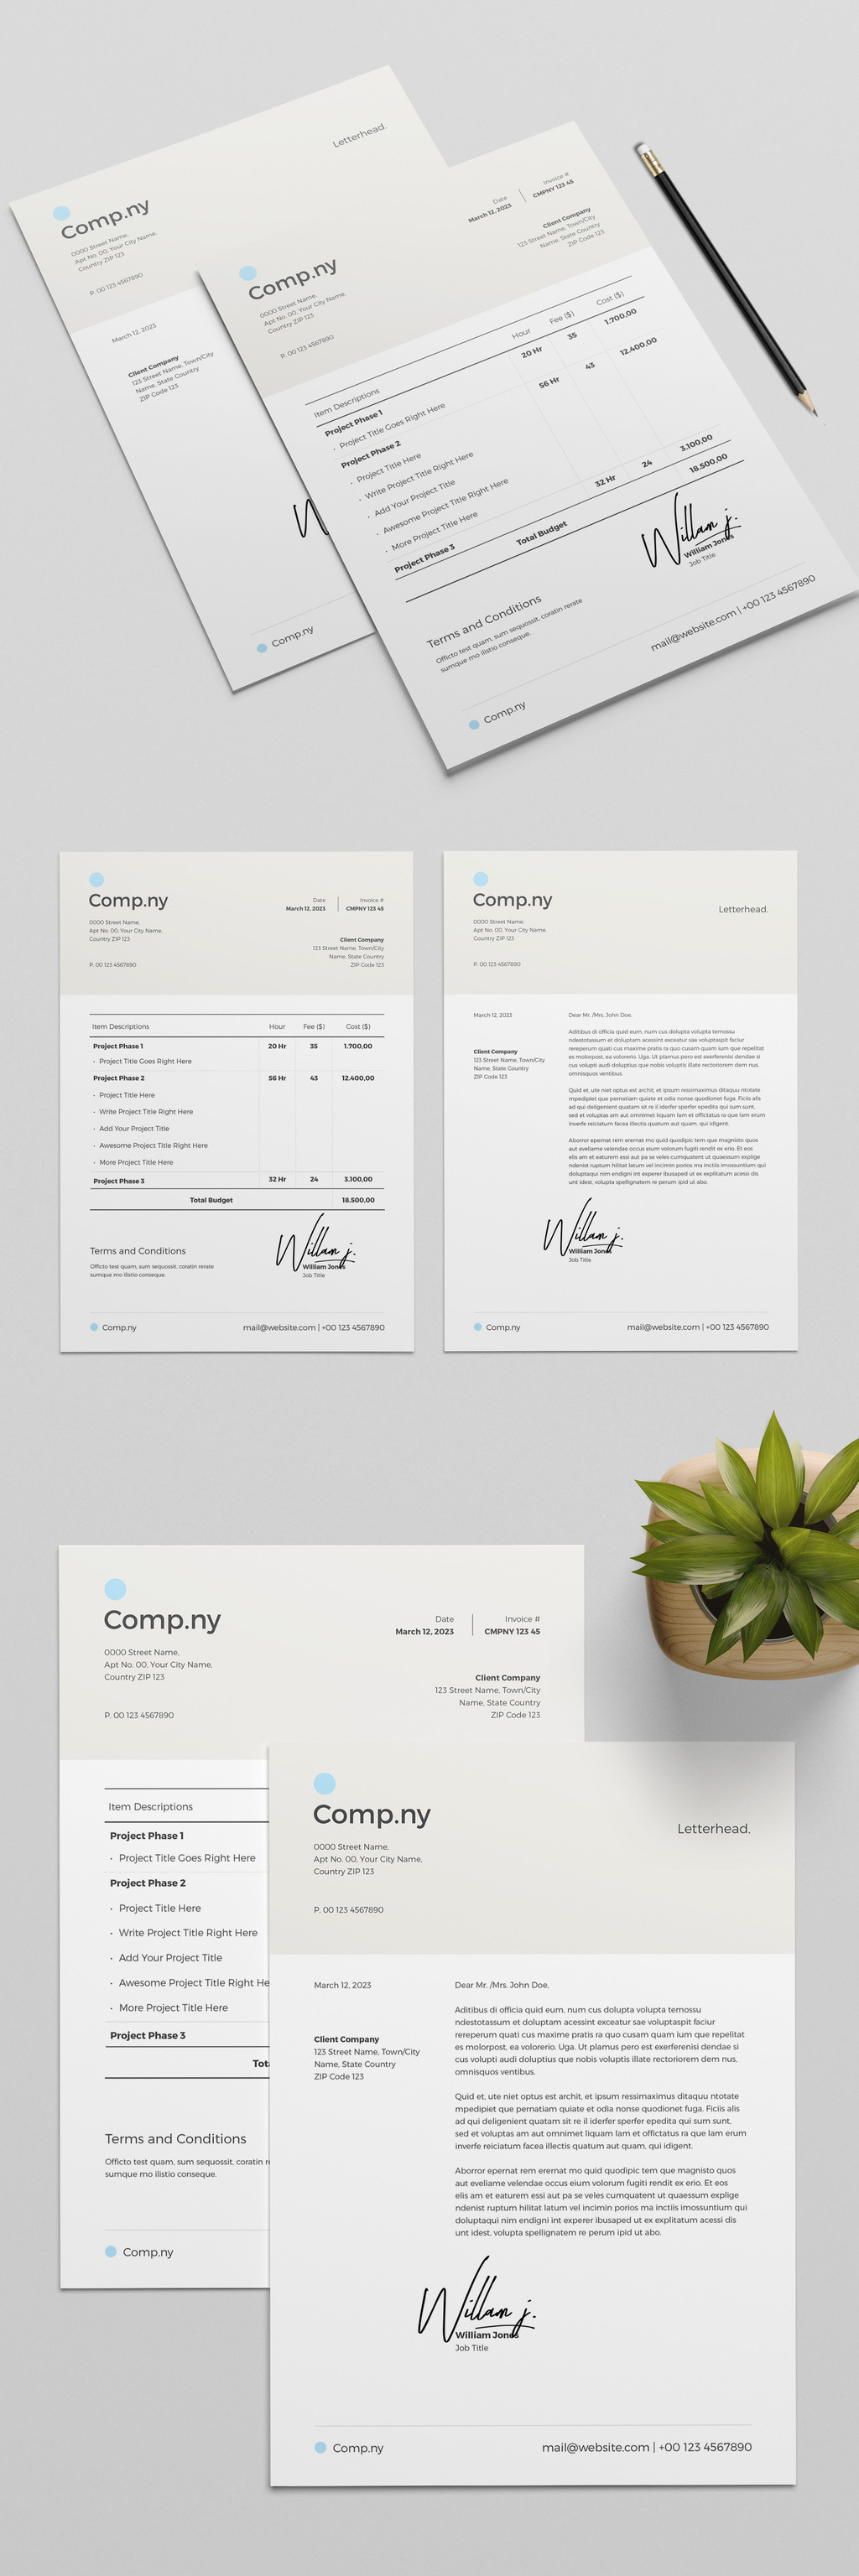 Download Invoice InDesign Template on Adobe Stock